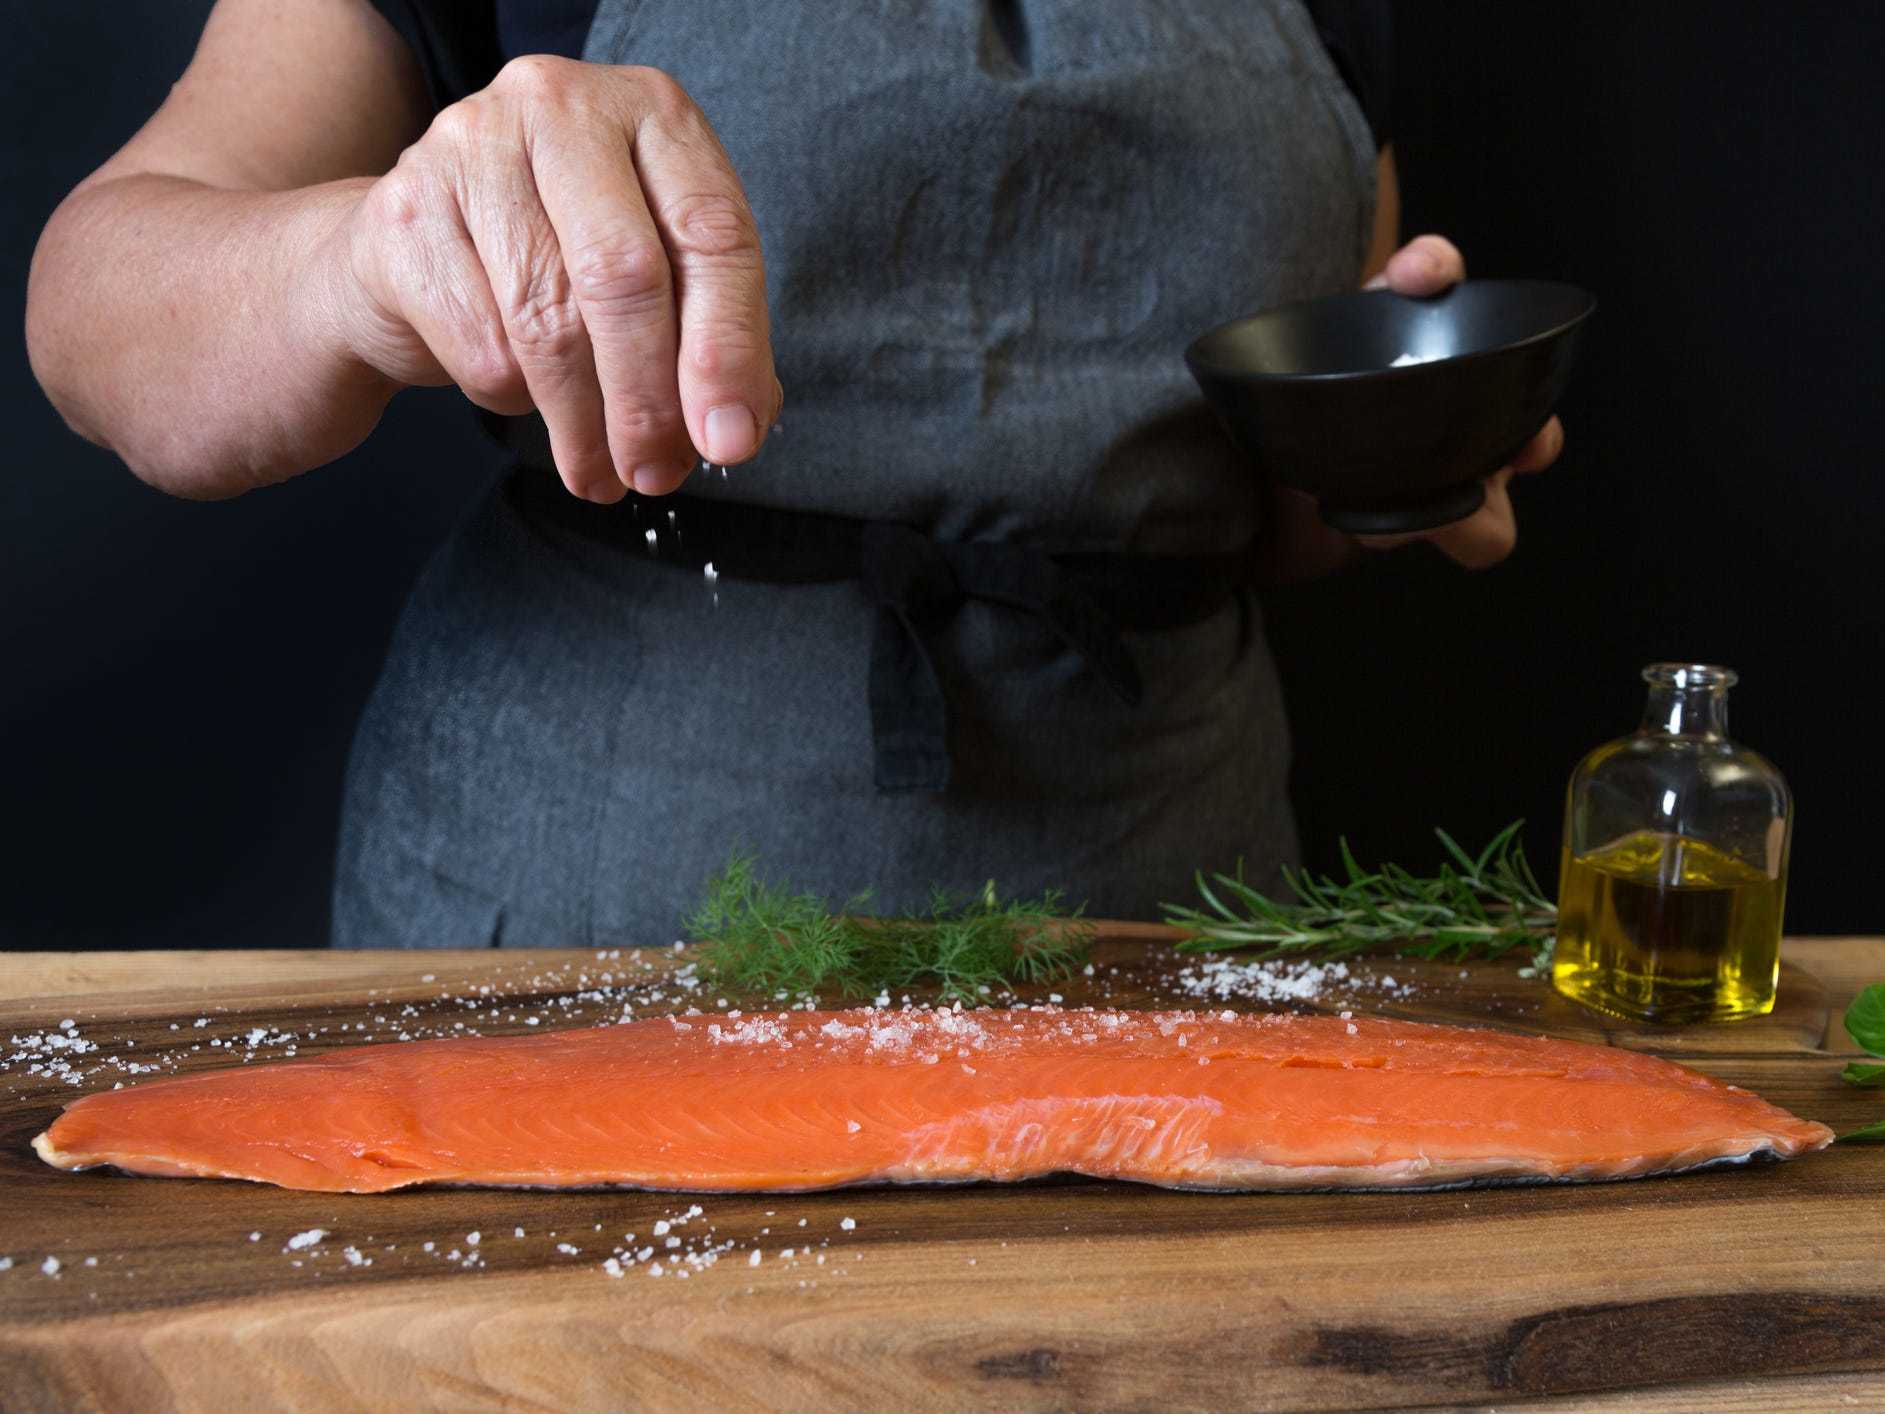 A home cook salting a salmon filet from above